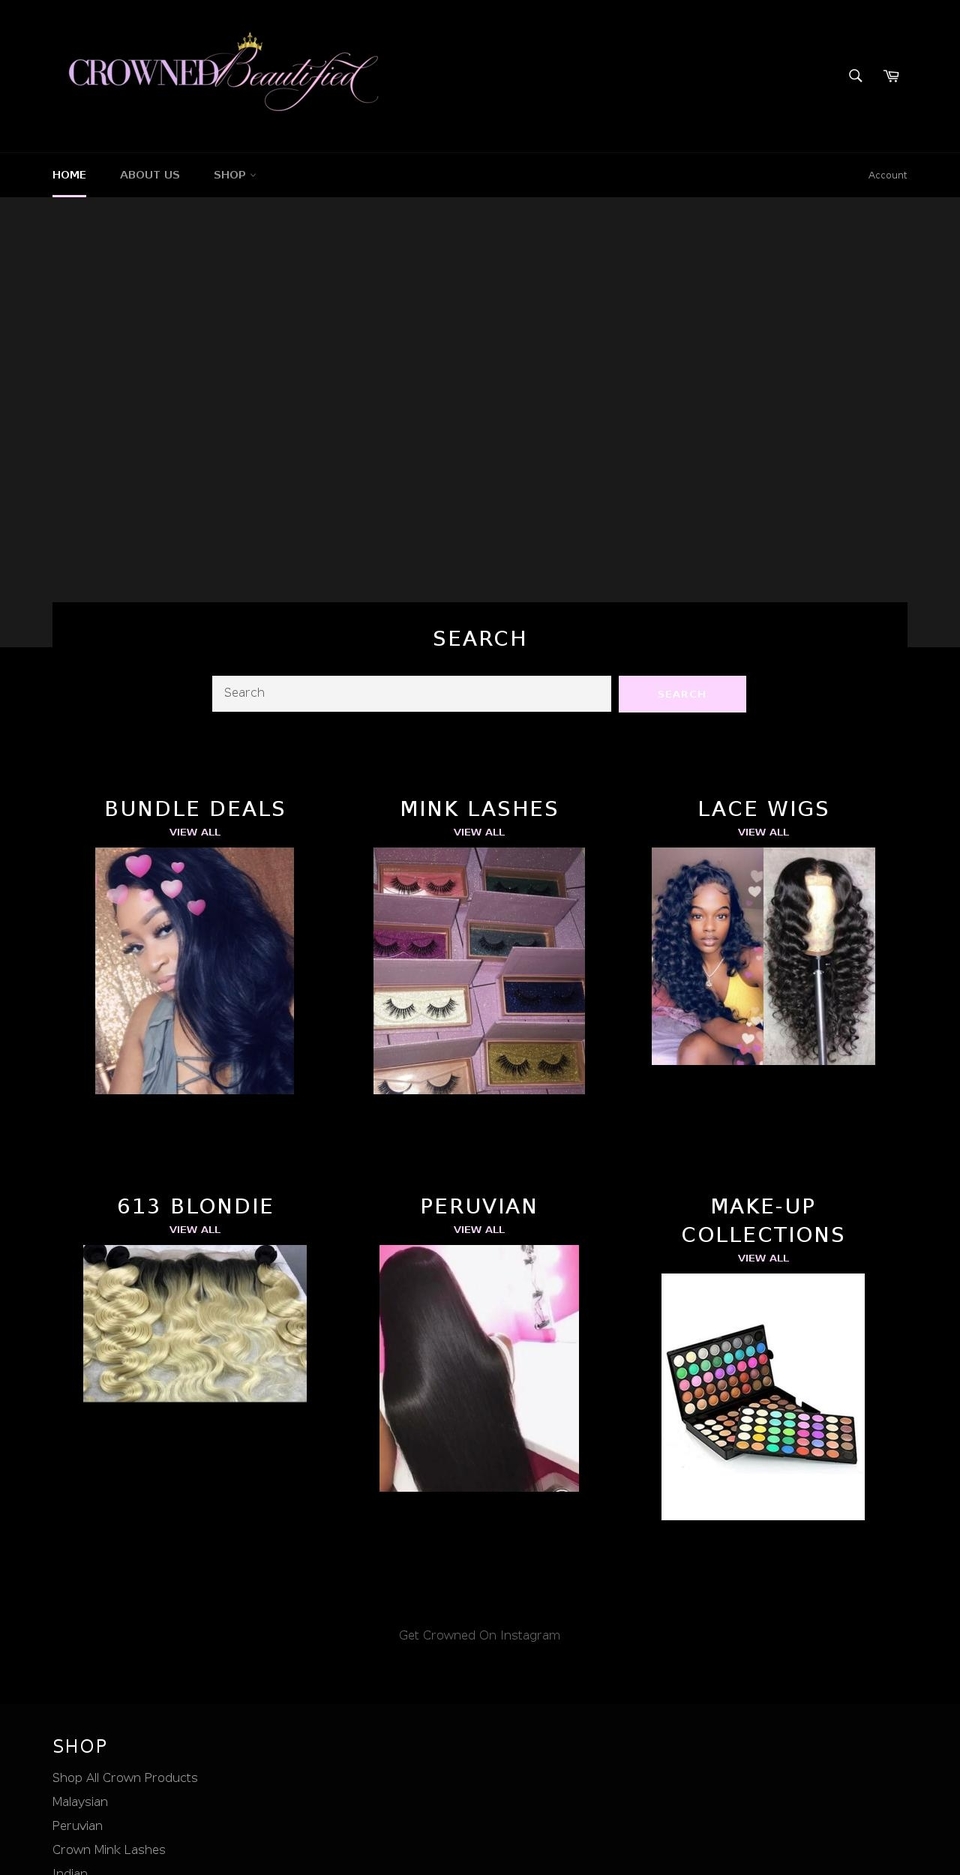 Blackout Shopify theme site example crownedbeautified.com